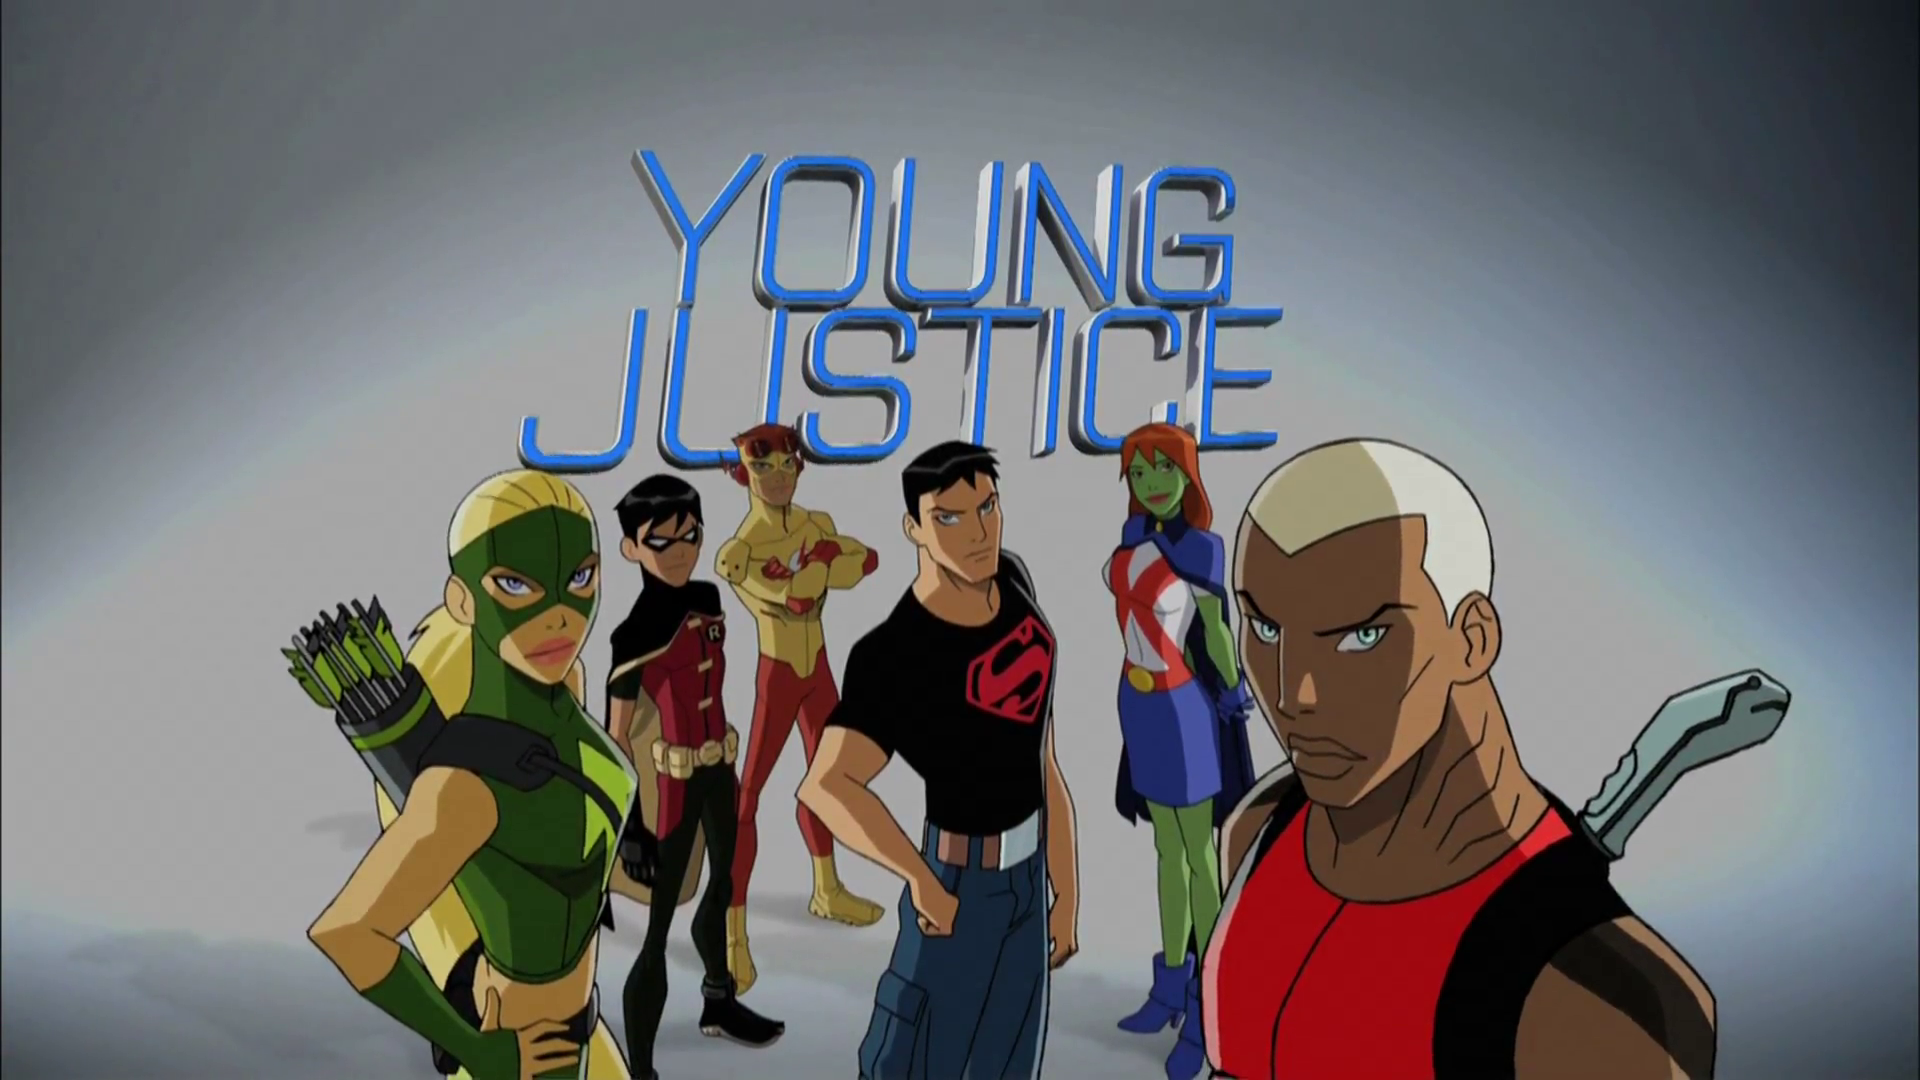 Young Justice: Cancelled Cartoon Network Series Revived for Season Three -  canceled + renewed TV shows - TV Series Finale